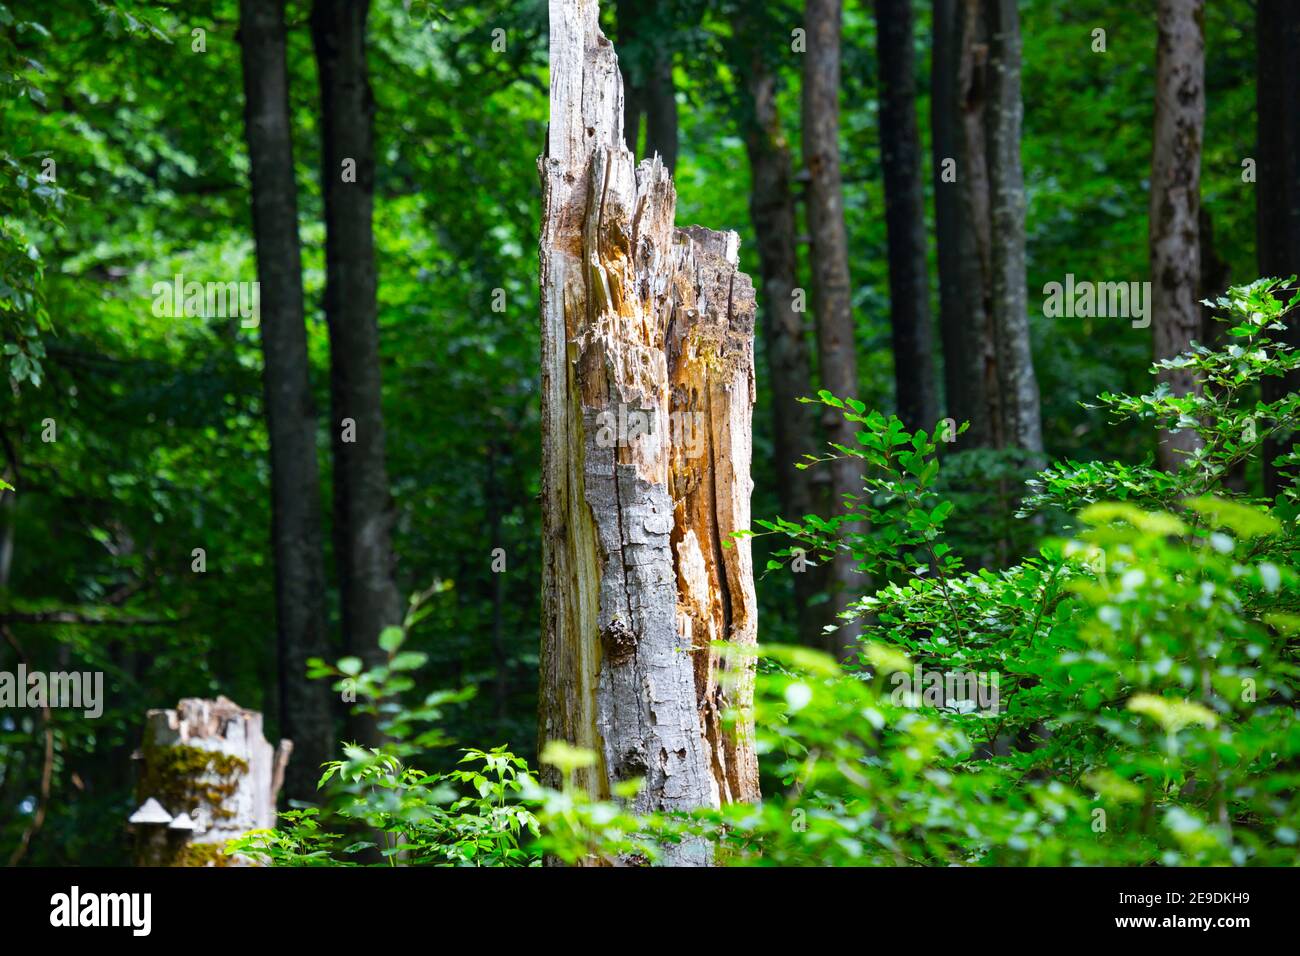 Damaged by lightning strike dried tree trunk in National park Plitvice lakes Croatia Europe Stock Photo